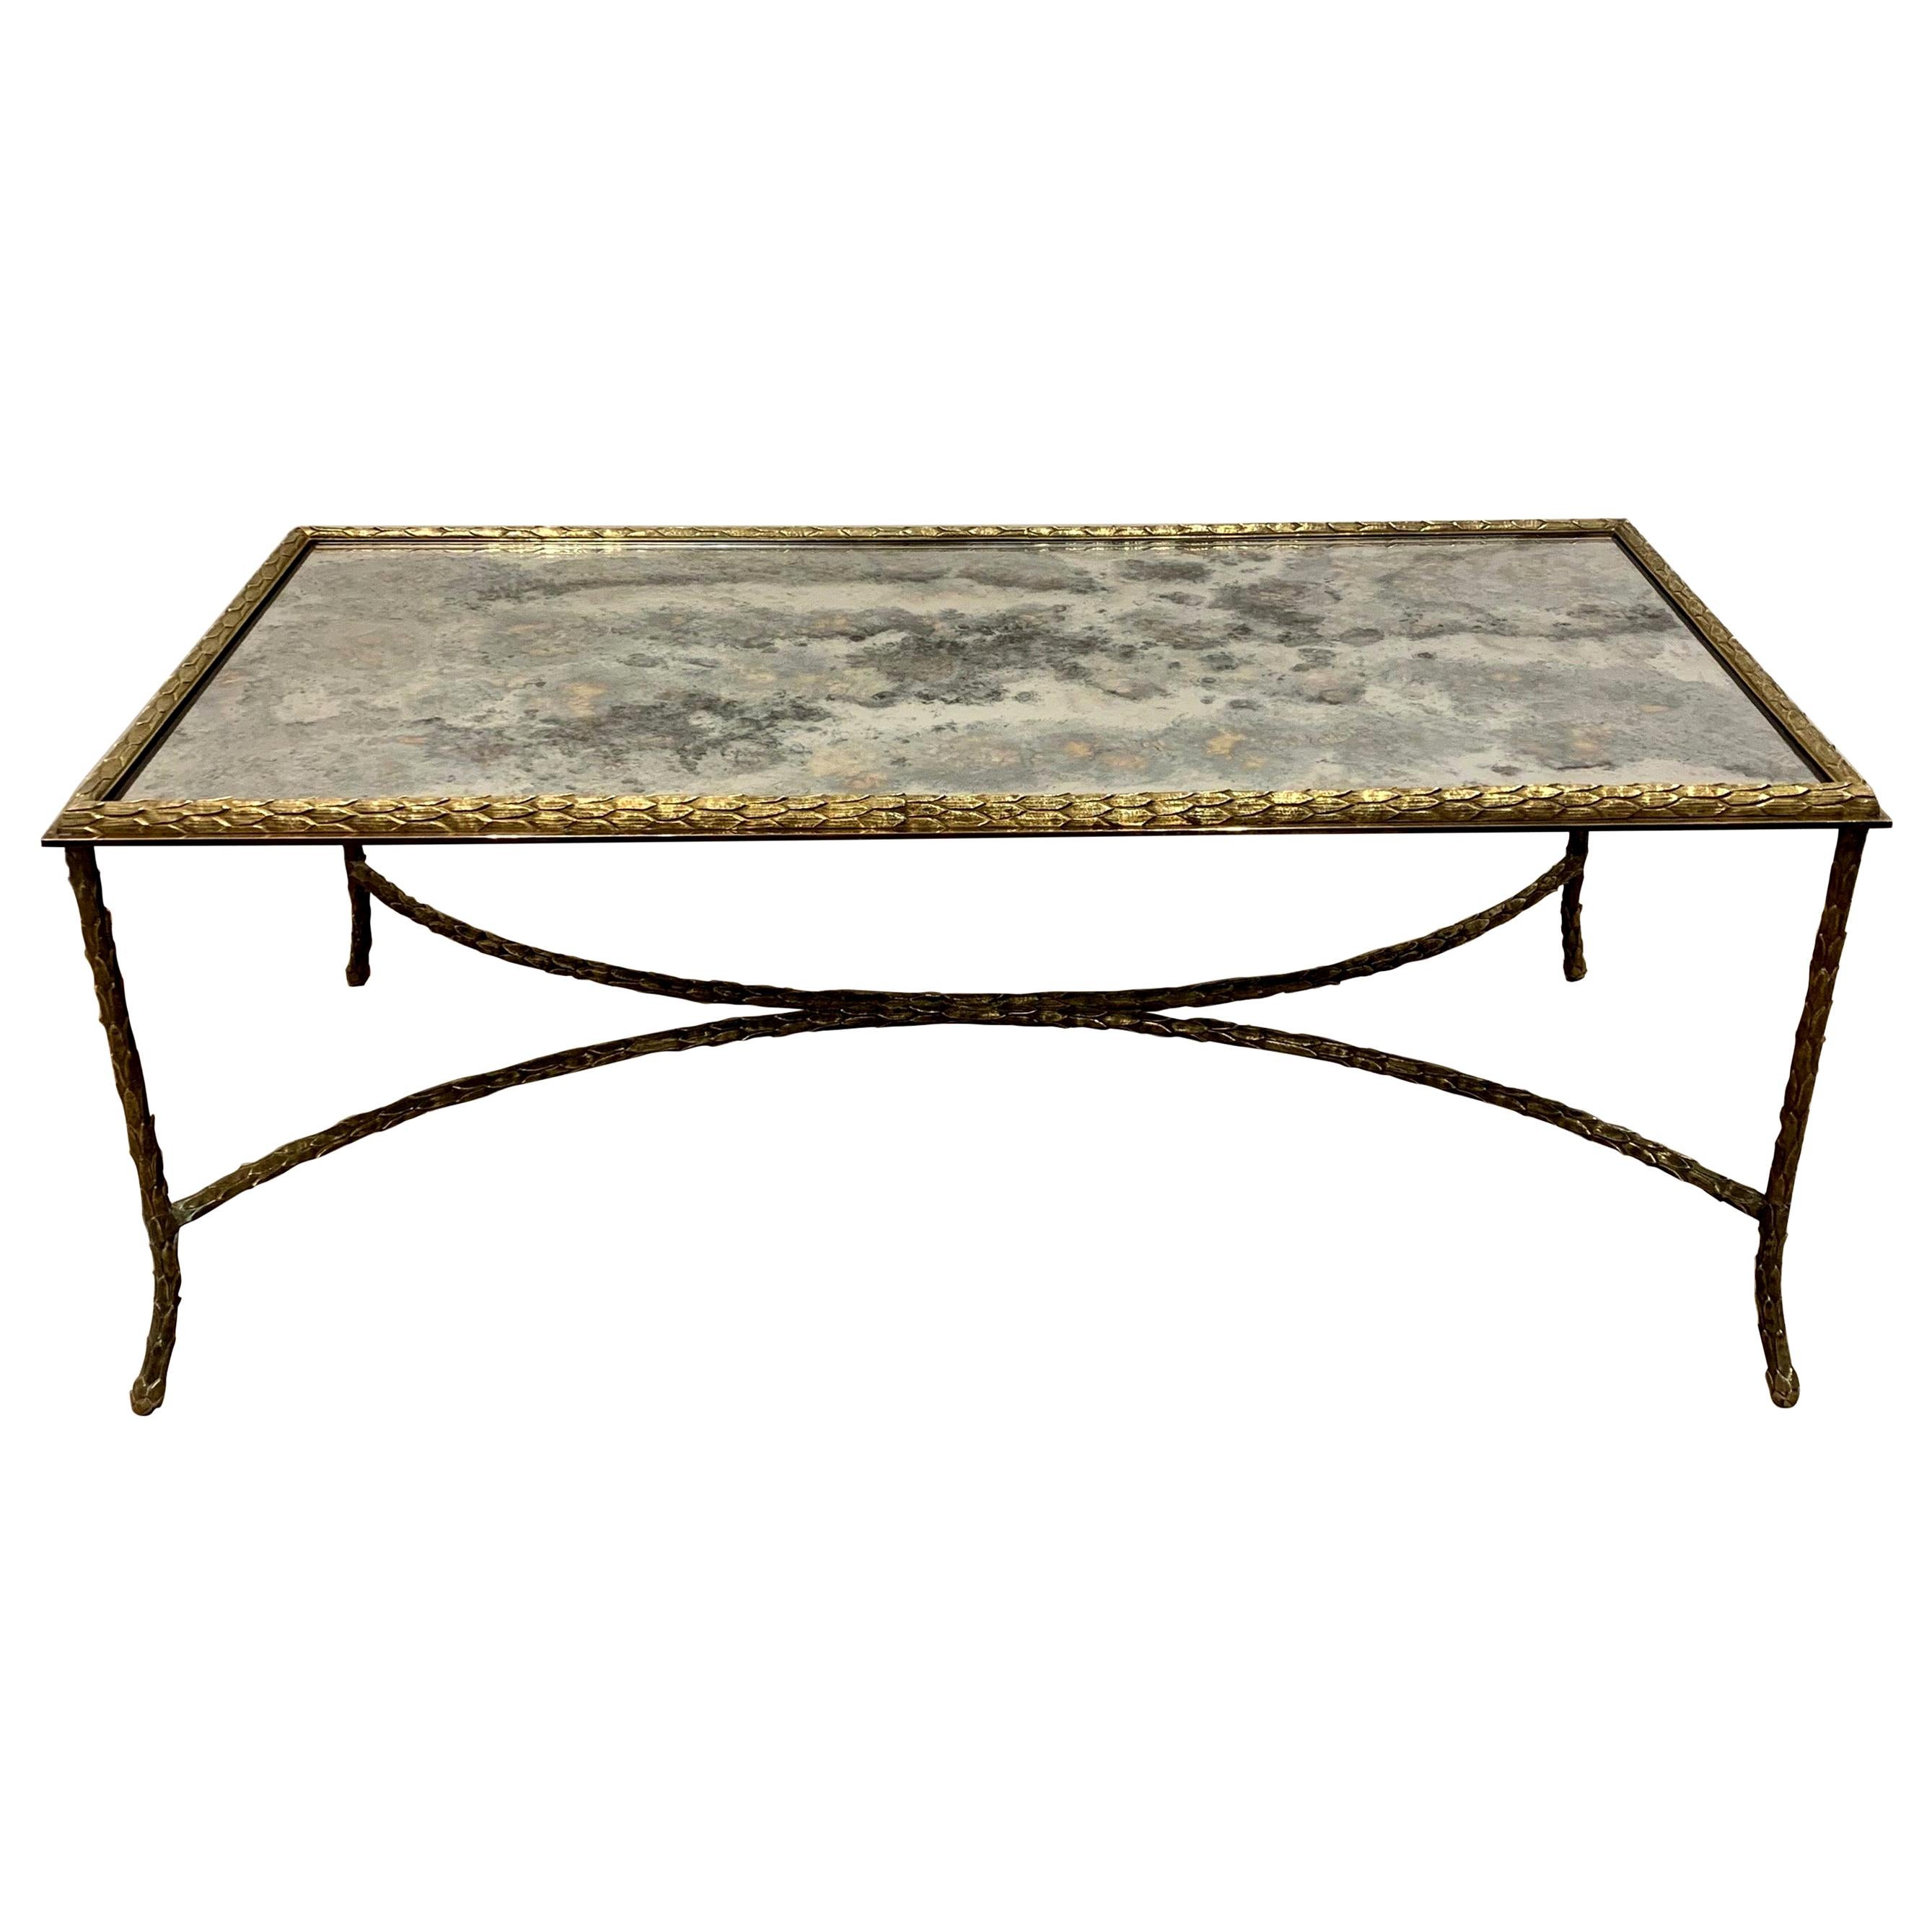 Maison Charles Paris Coffee Table with Oxidized Mirror Top, 1960s